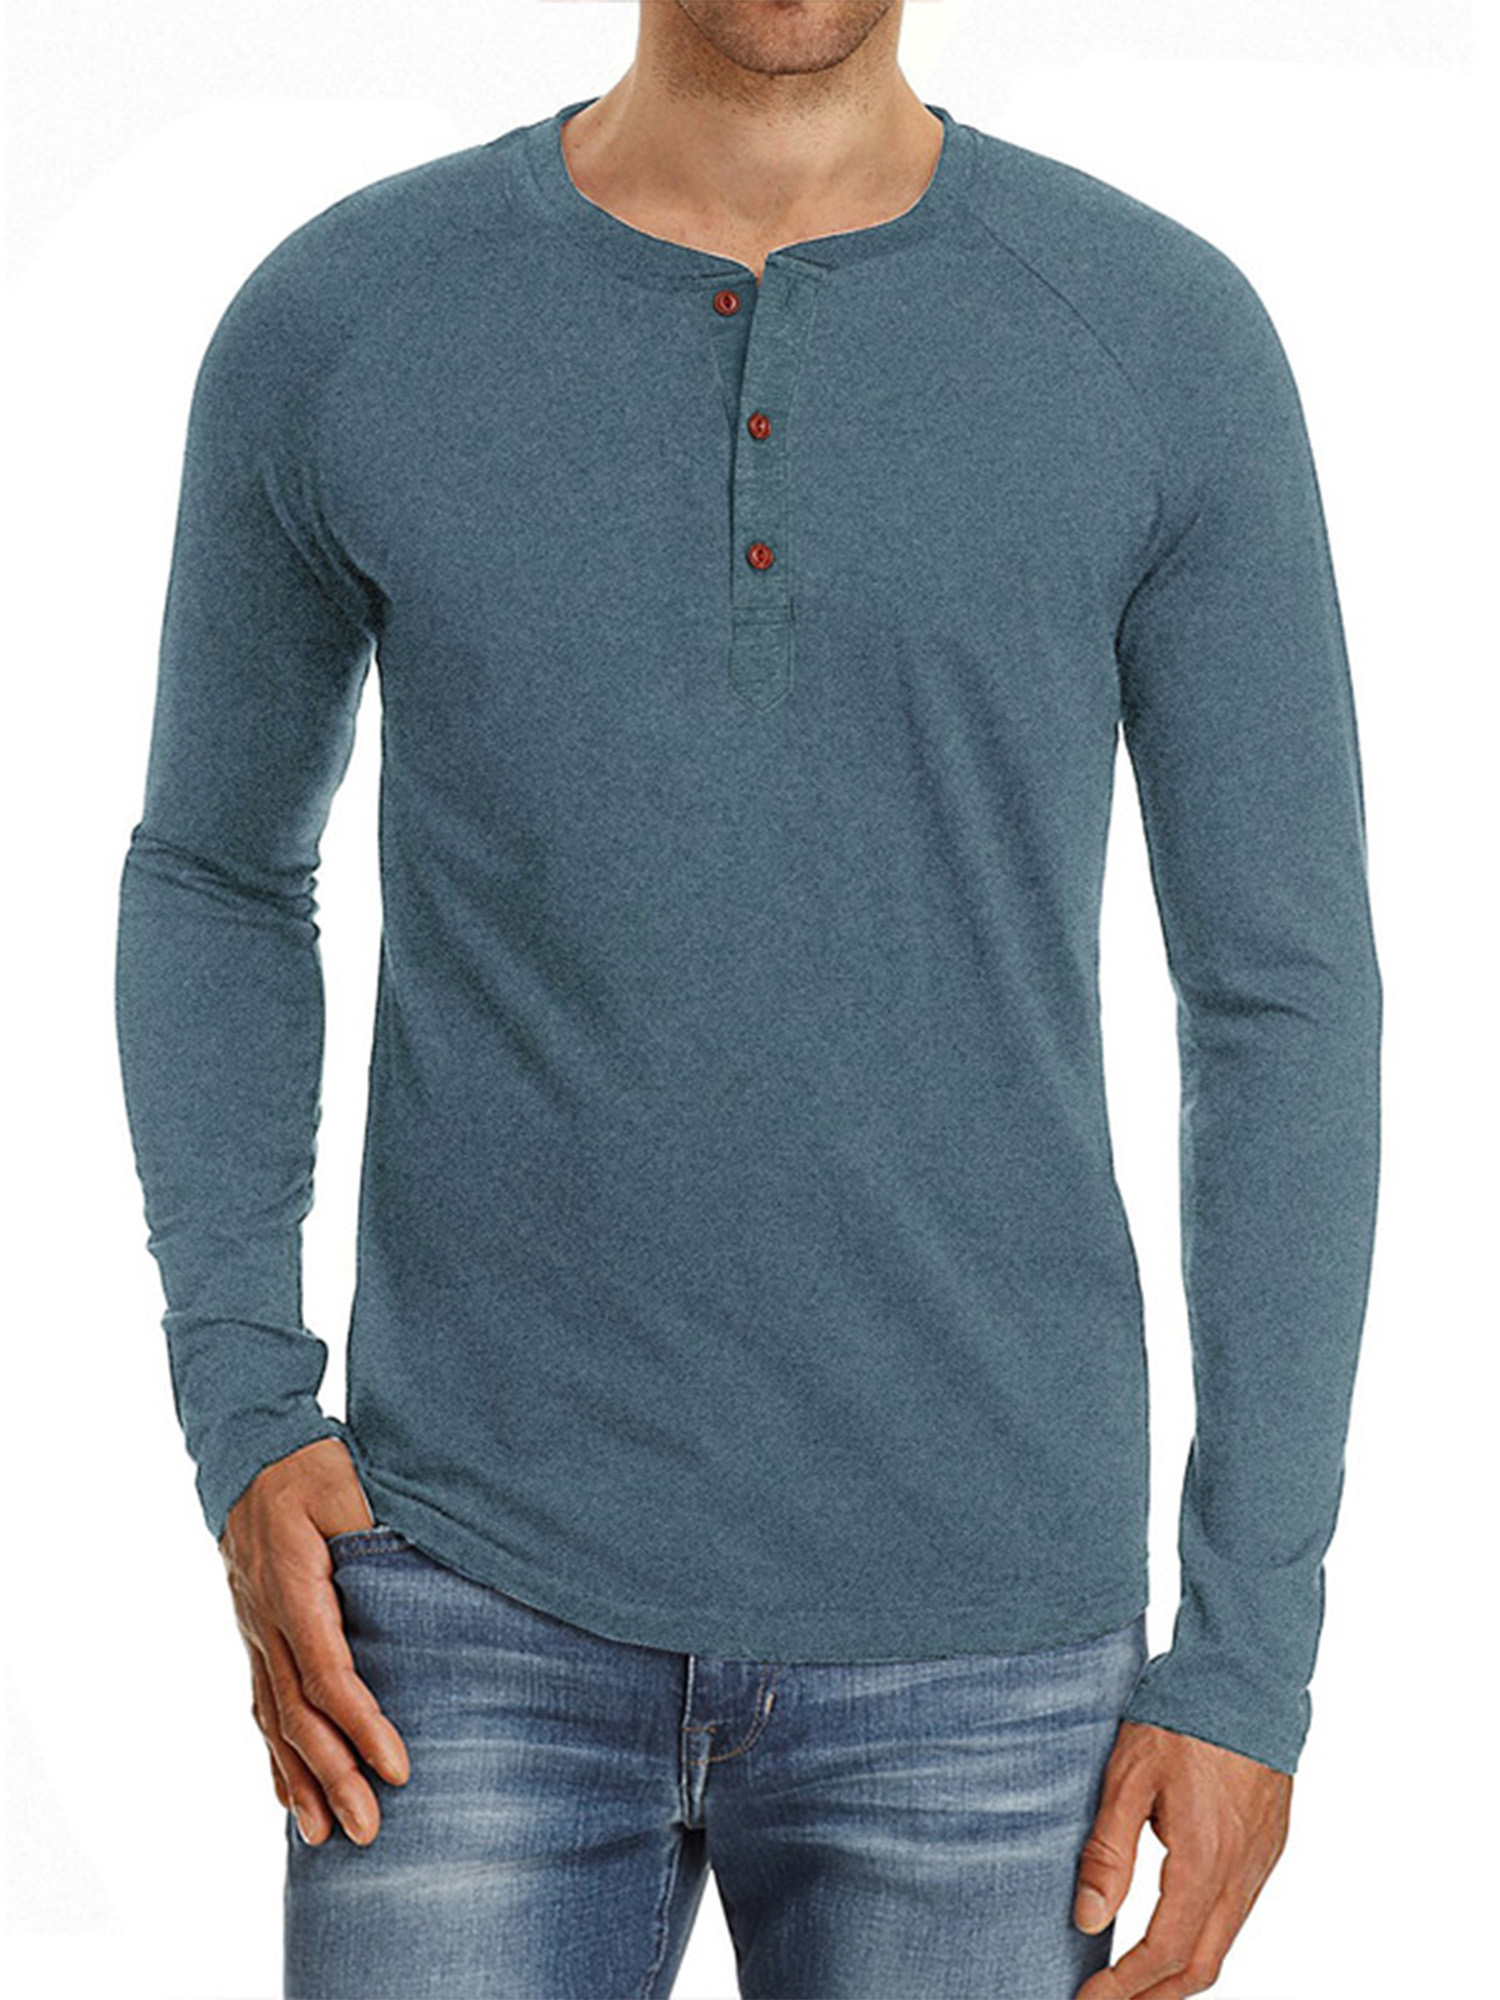 New Mens Henley Shirt T-shirts shirts Long Sleeve Cotton Pullover Comfy Button